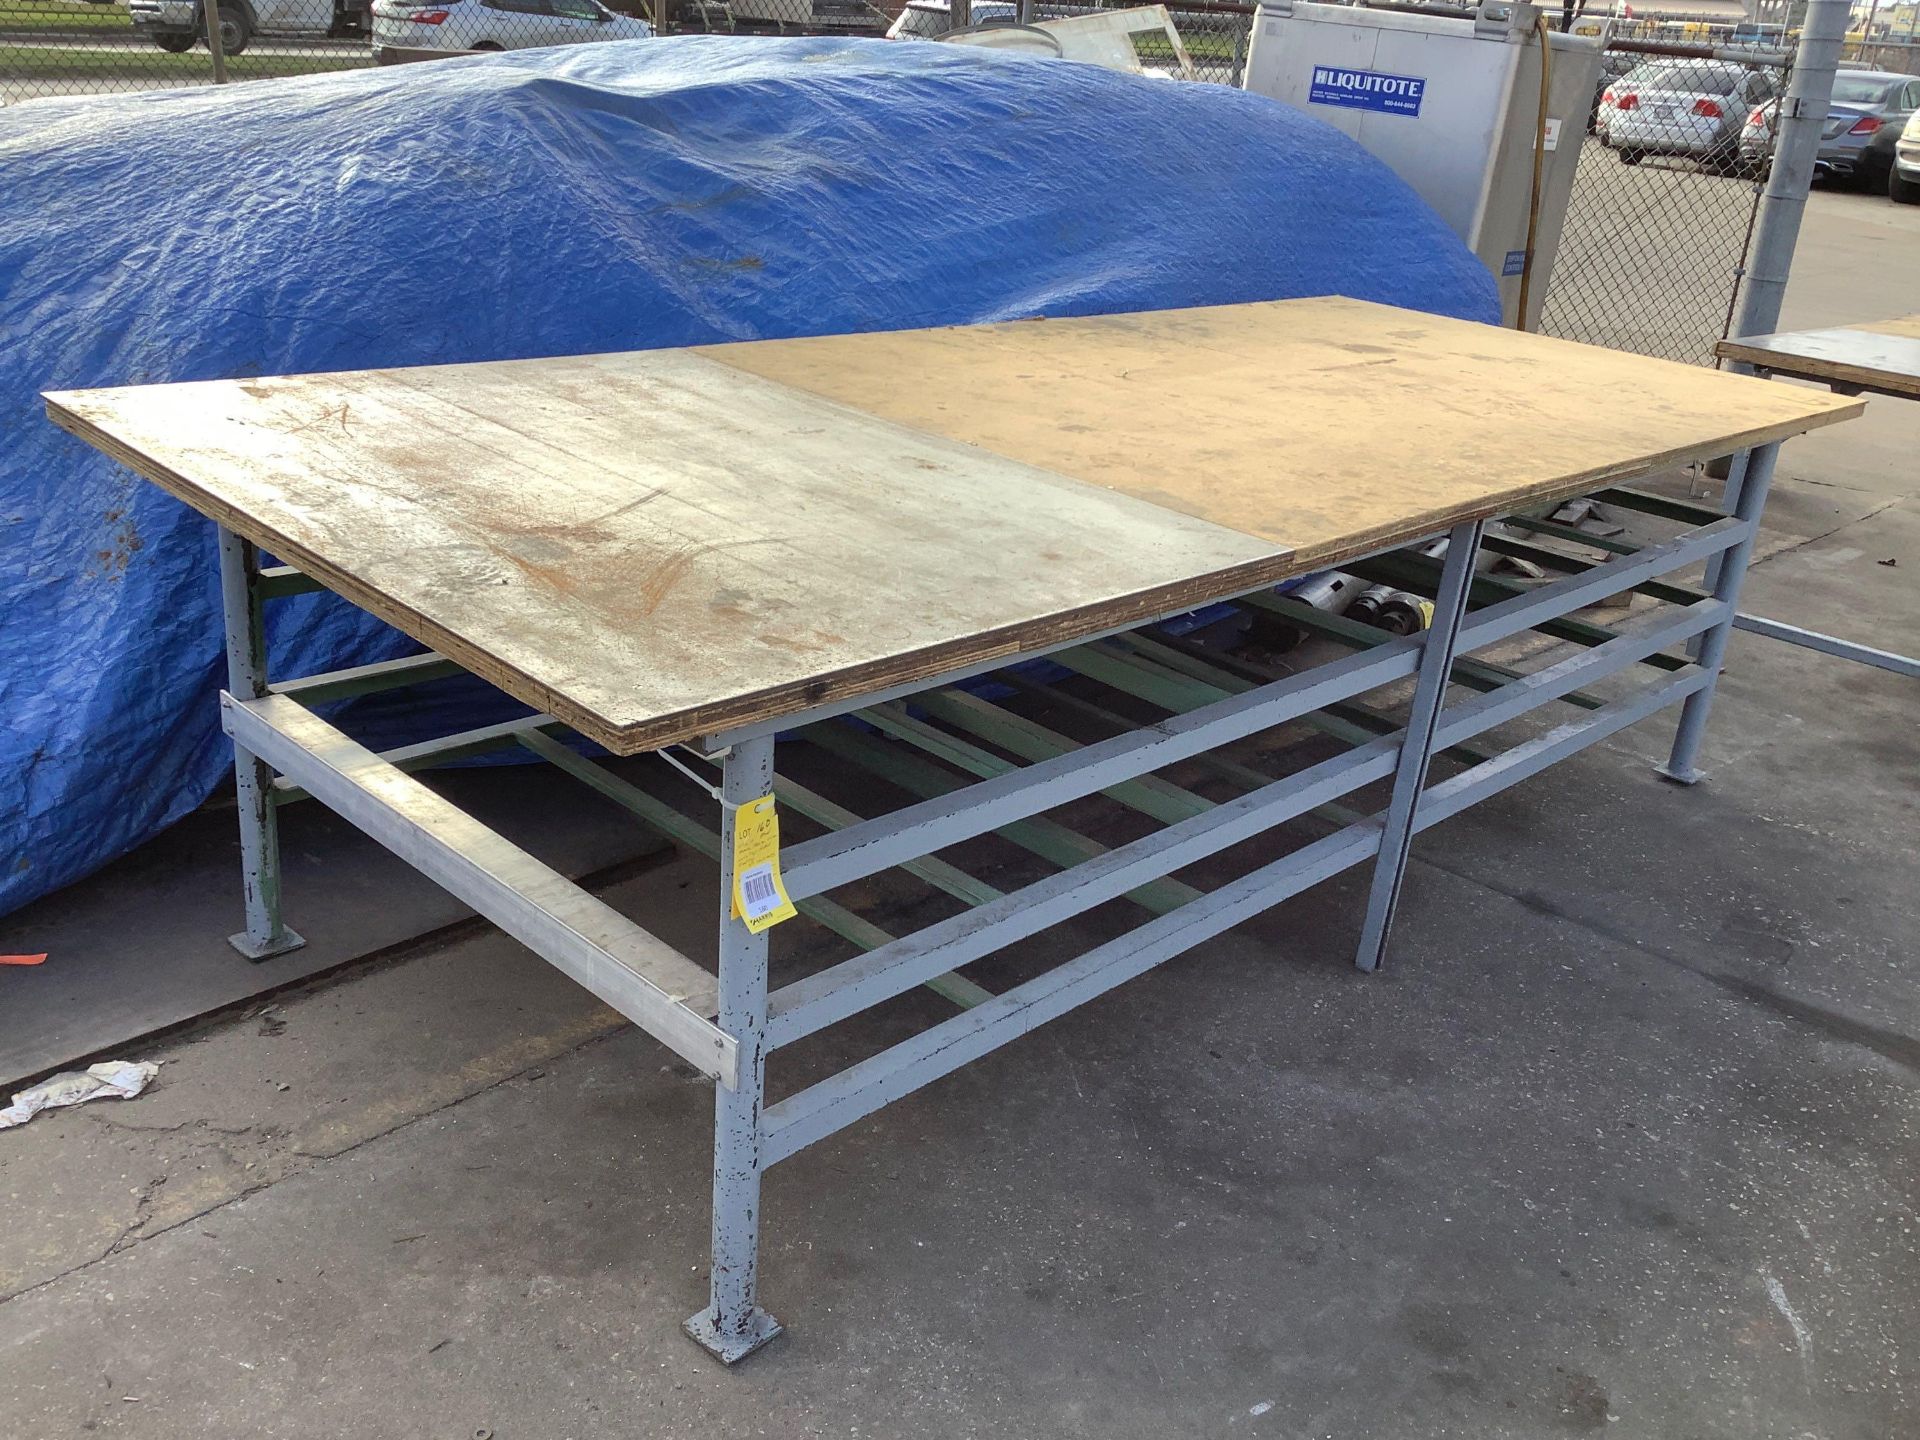 5' x 12' Steel Frame Table, content on or under NOT included